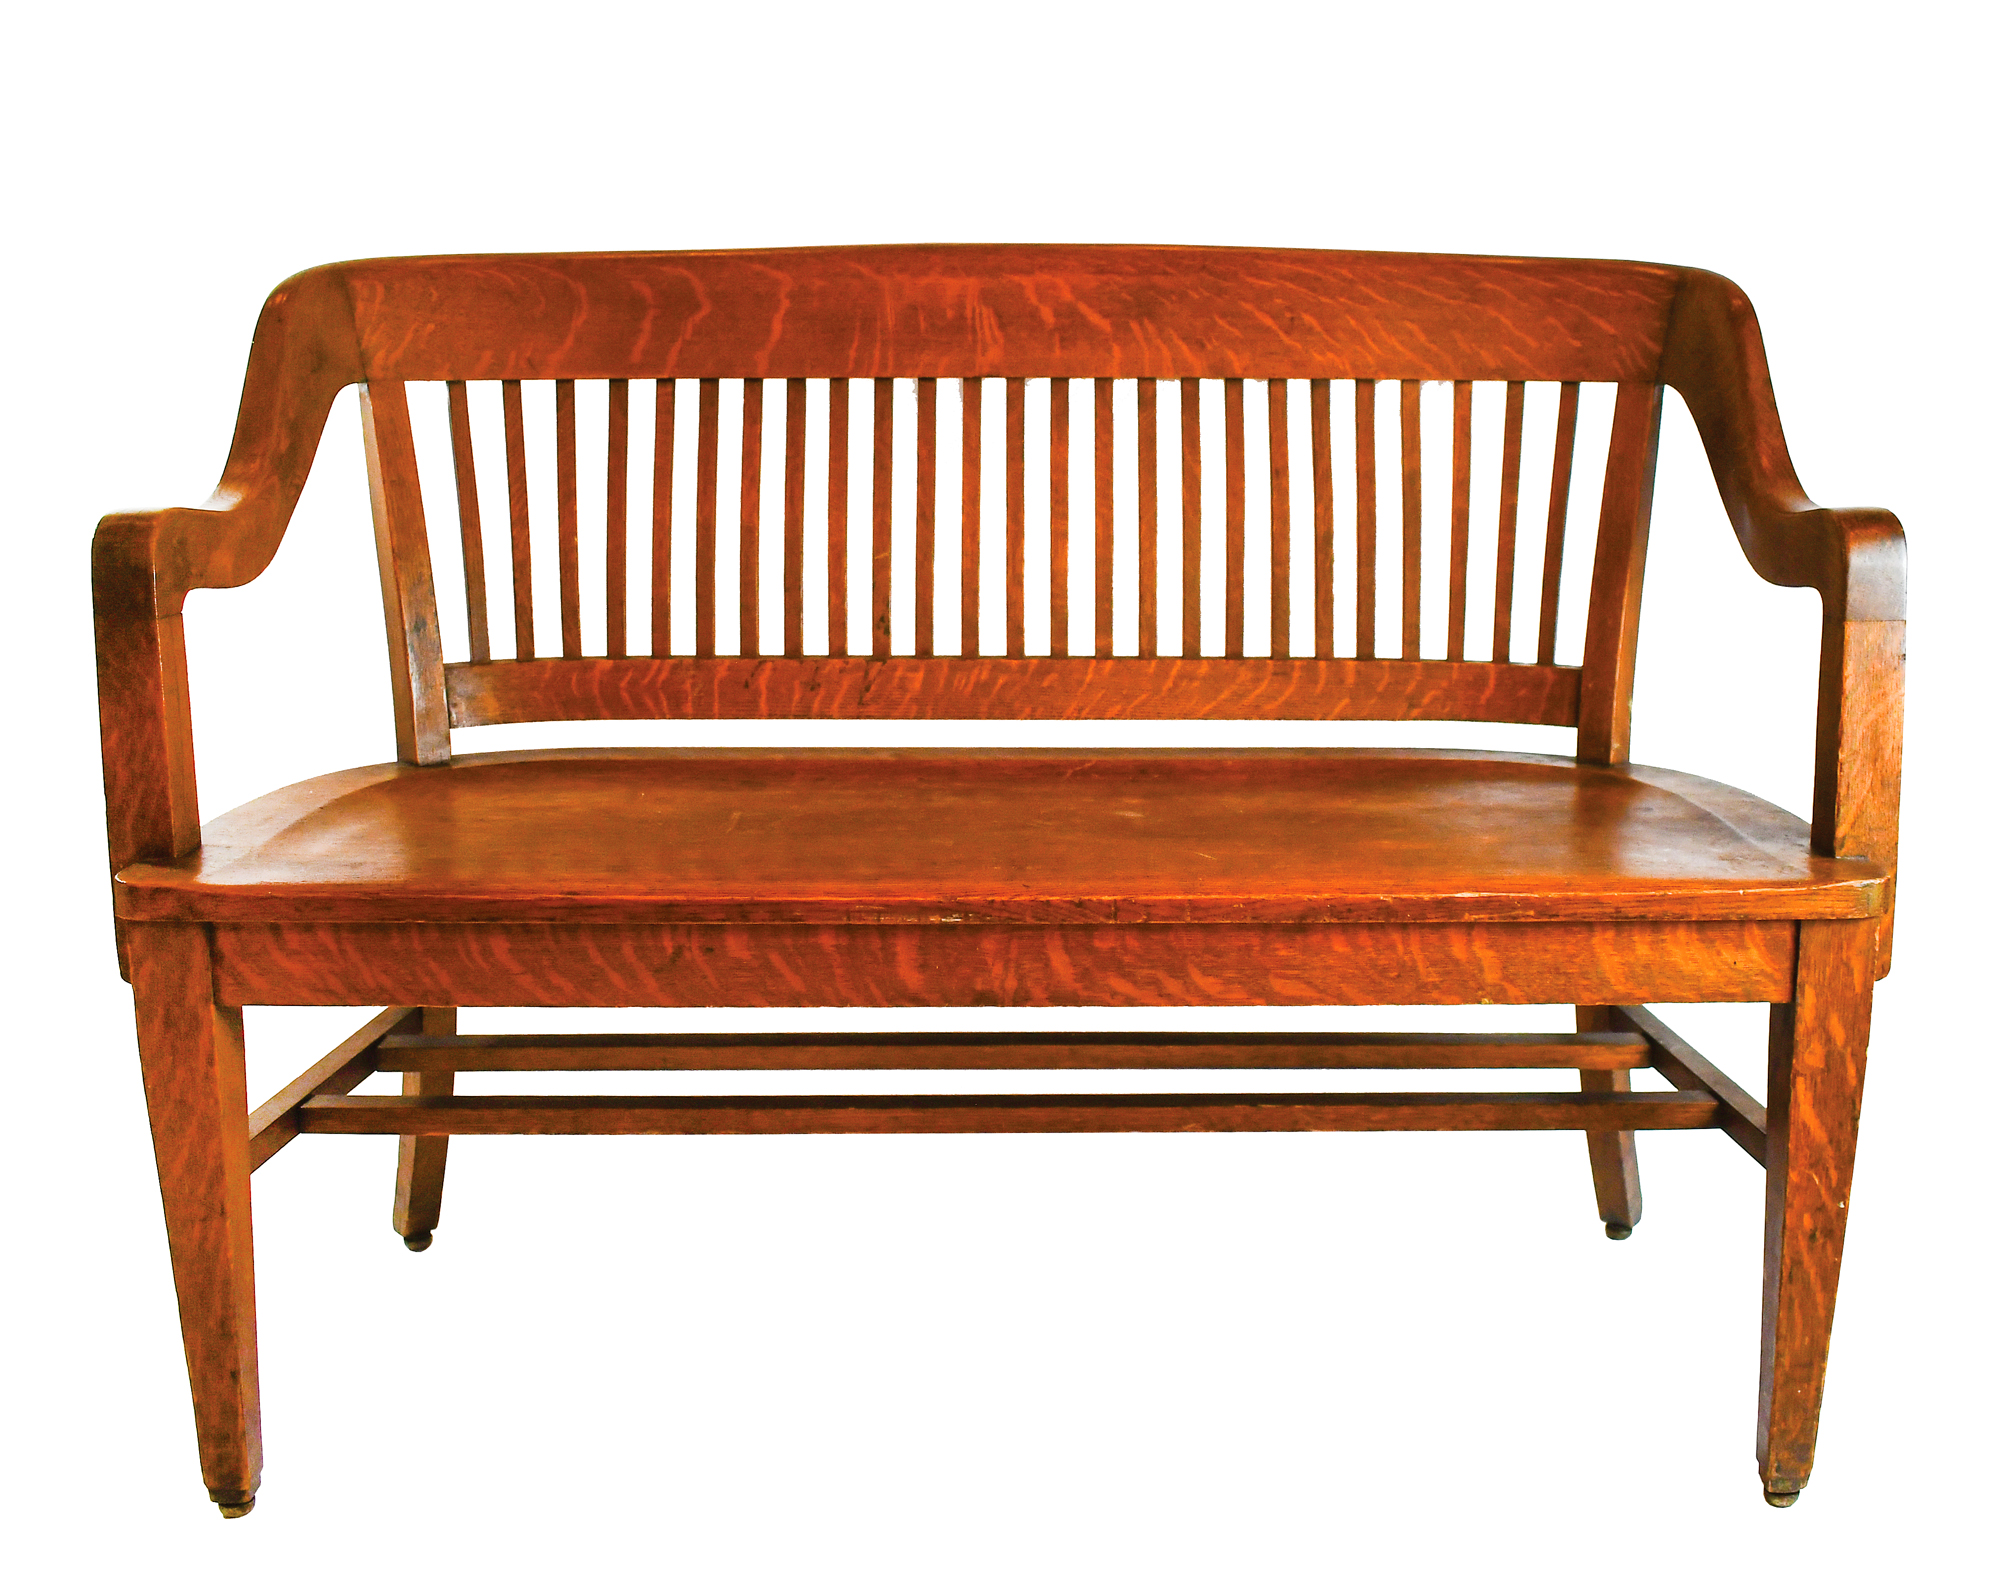 Lot #1658 Forrest Gump: Screen-Used School Bench